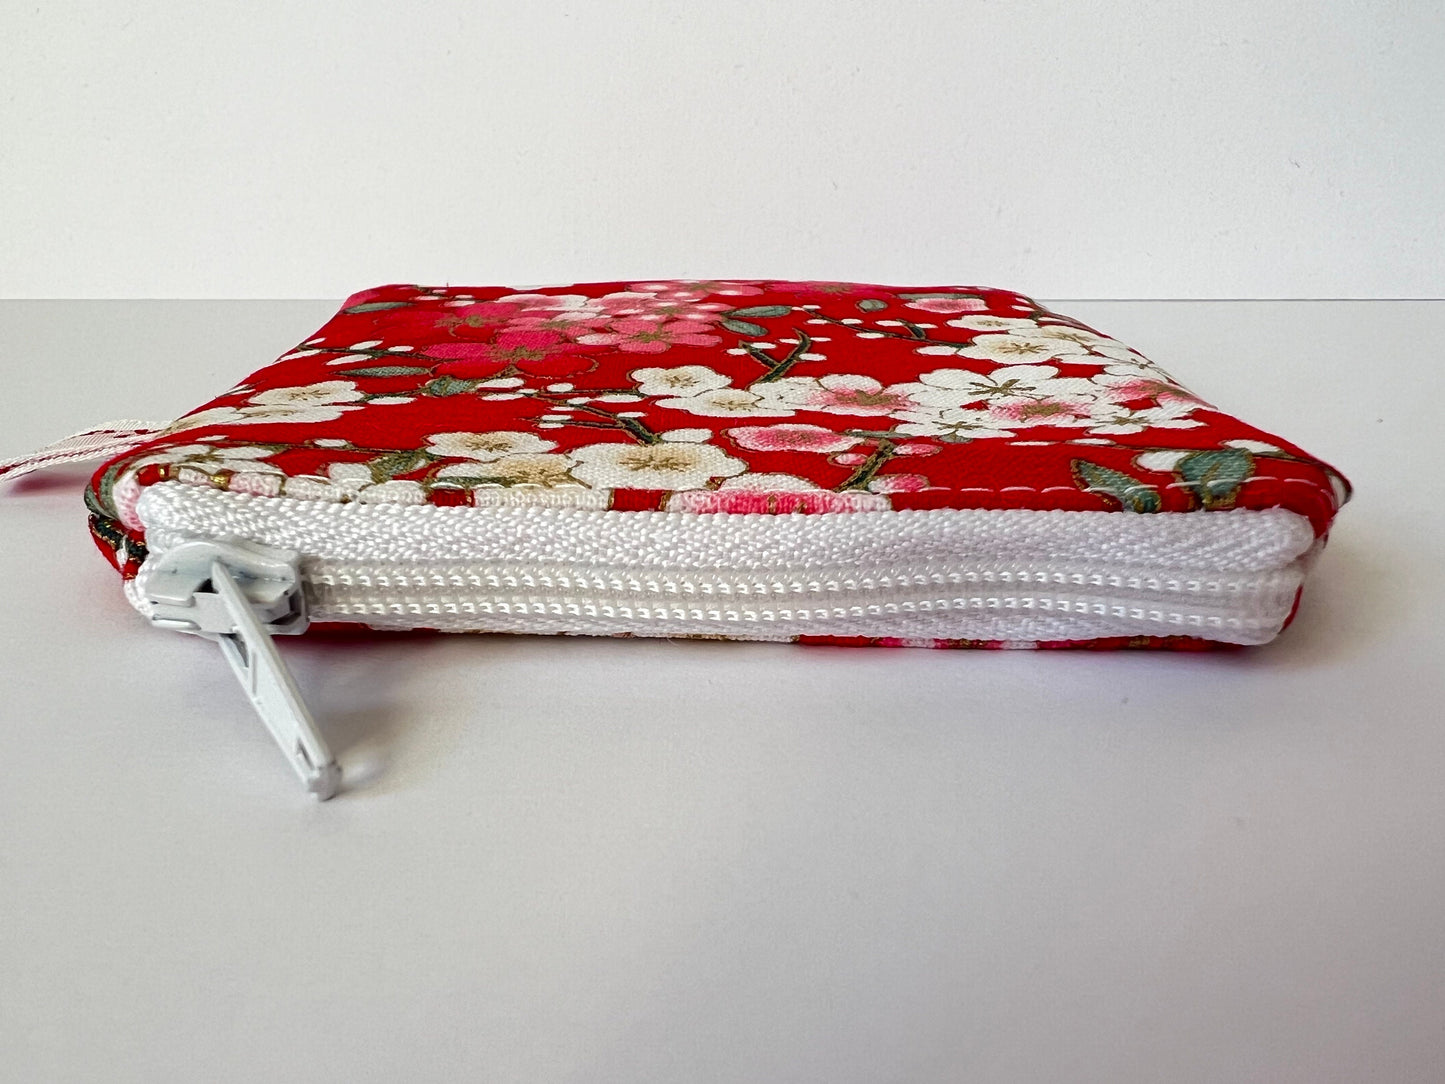 Cherry Blossom Print Mini Notions Case for Knitters - Limited Edition